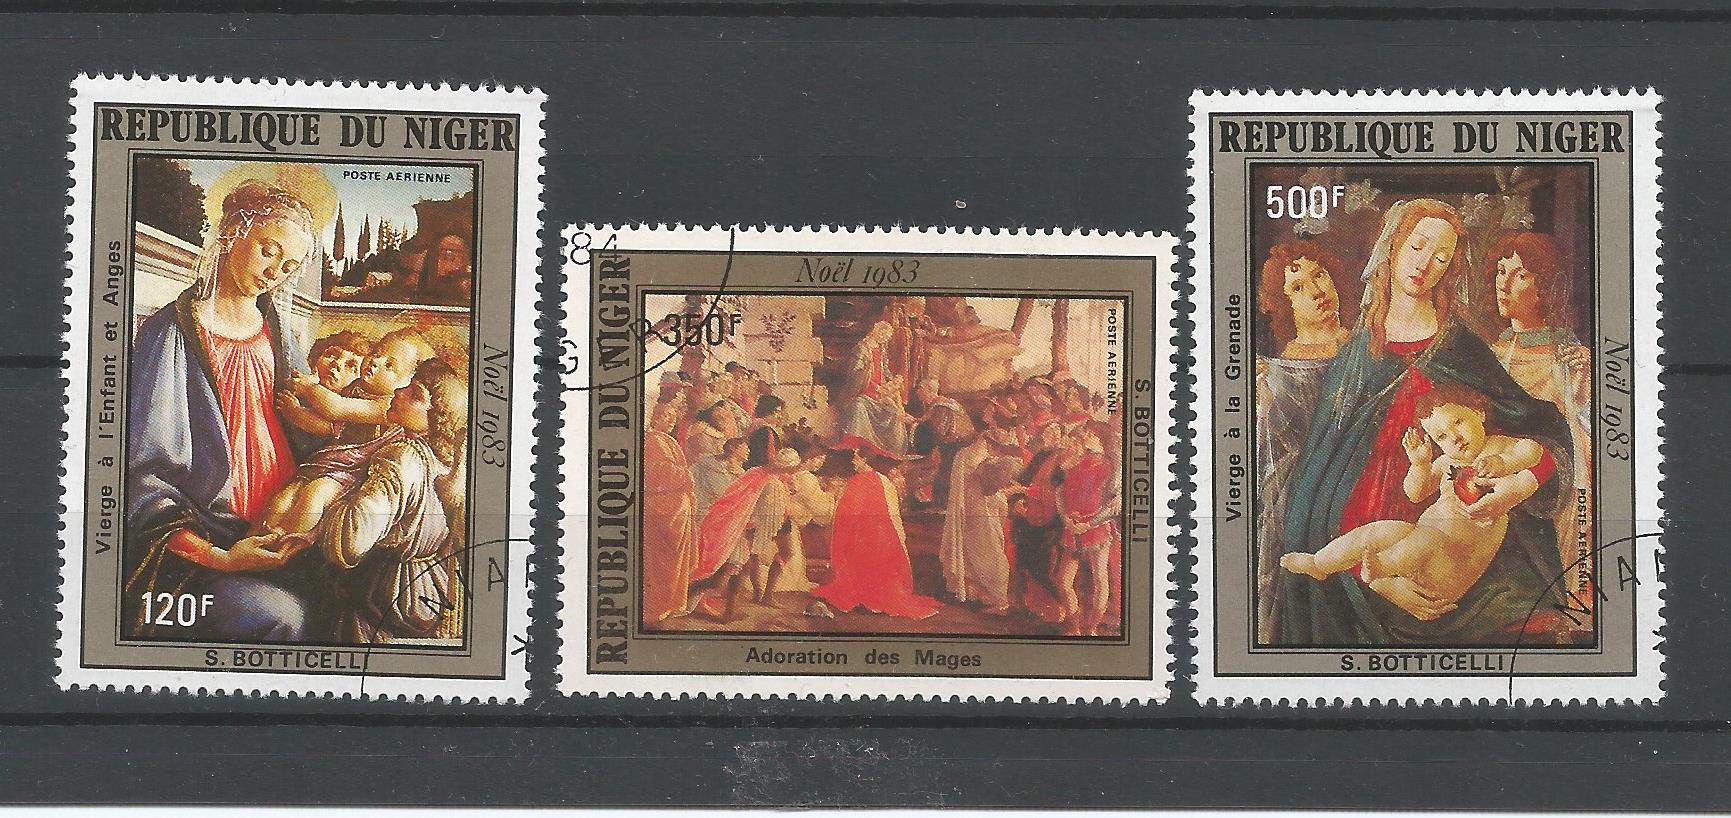 51192 - NIGER - 1983 - Natale - Serie compl. 3 val. timbrati - Michel : 872/874 - Yvert : PA317/319 - (NGR002)